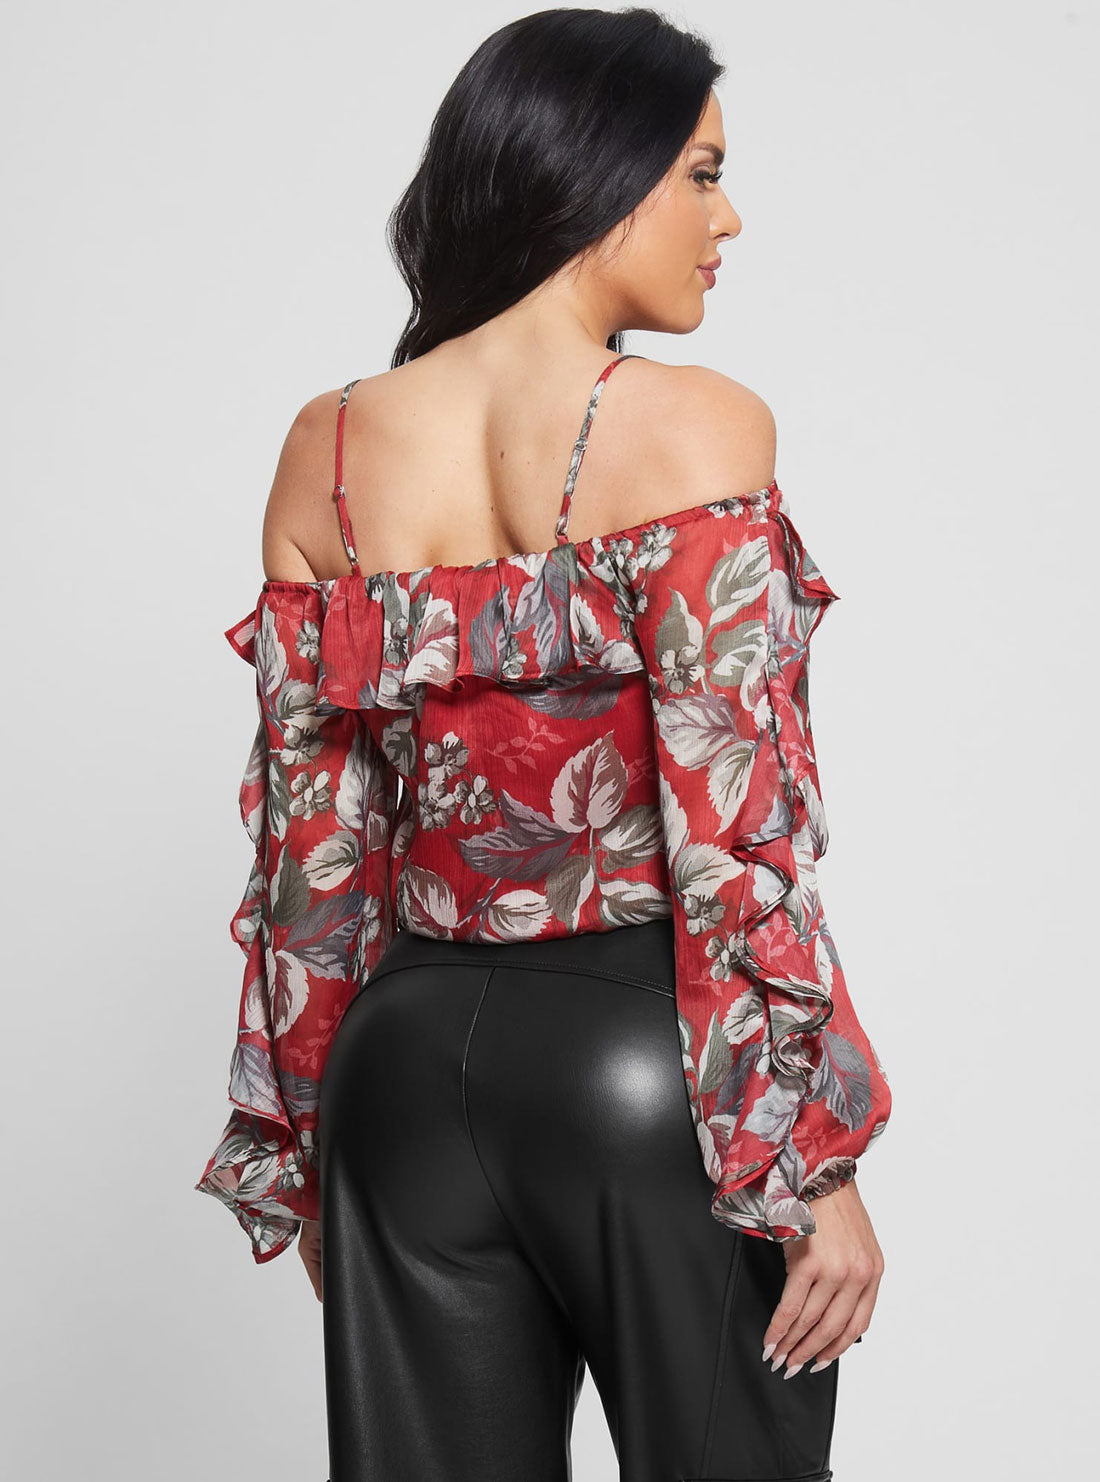 Red Floral Iggy Top | GUESS Women's Apparel | back view